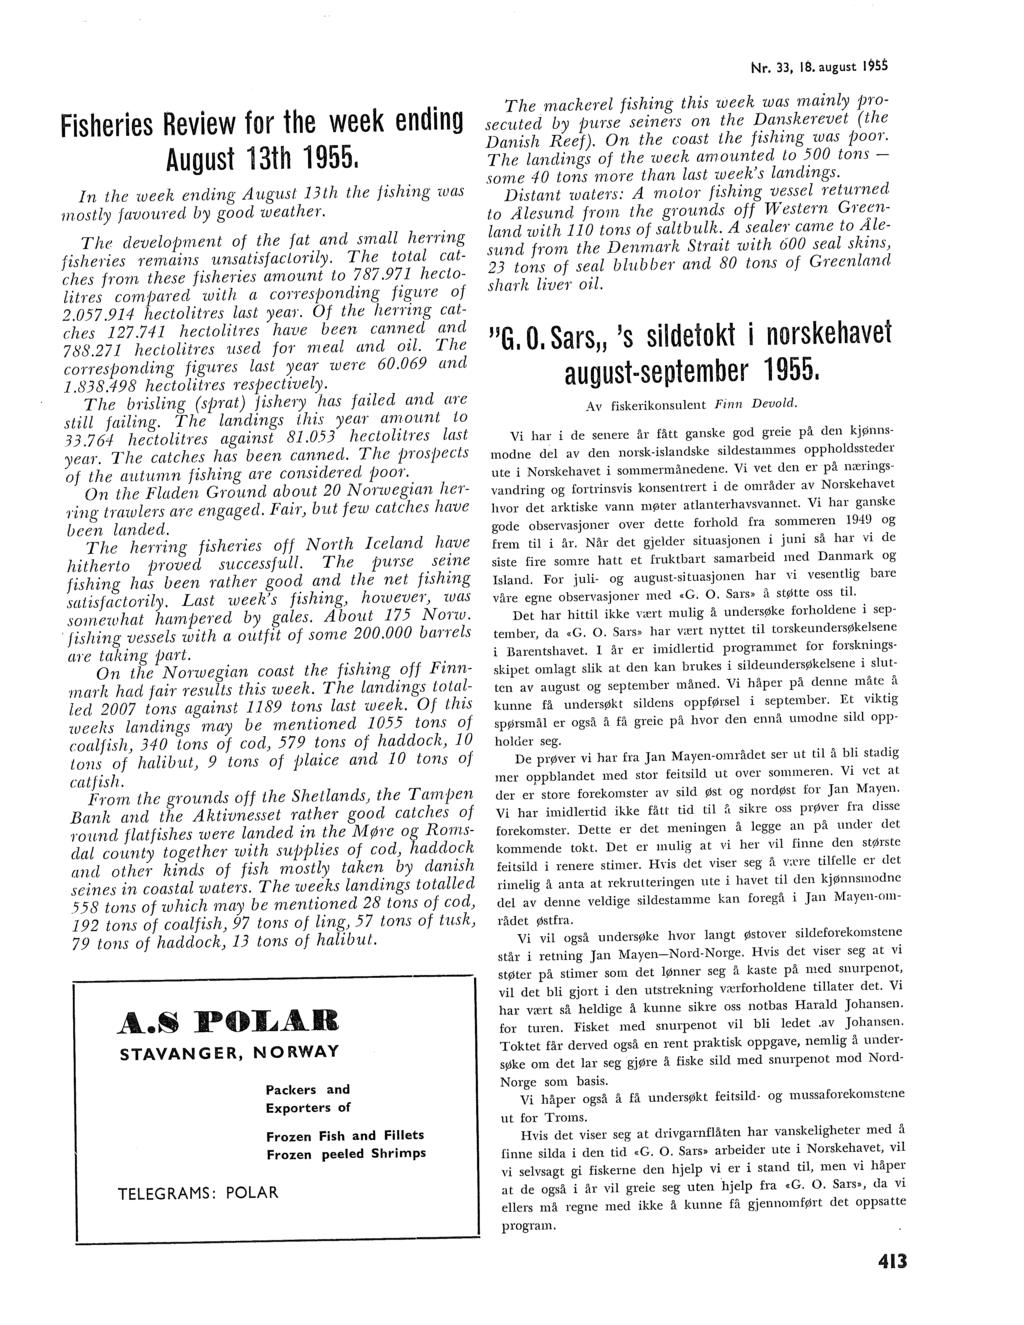 Nr. 33, IS. august 1955 Fisheries Review for the week ending August 13th 1955. In the week ending August 13th the jishing was mosty javo1.ned by good weather.